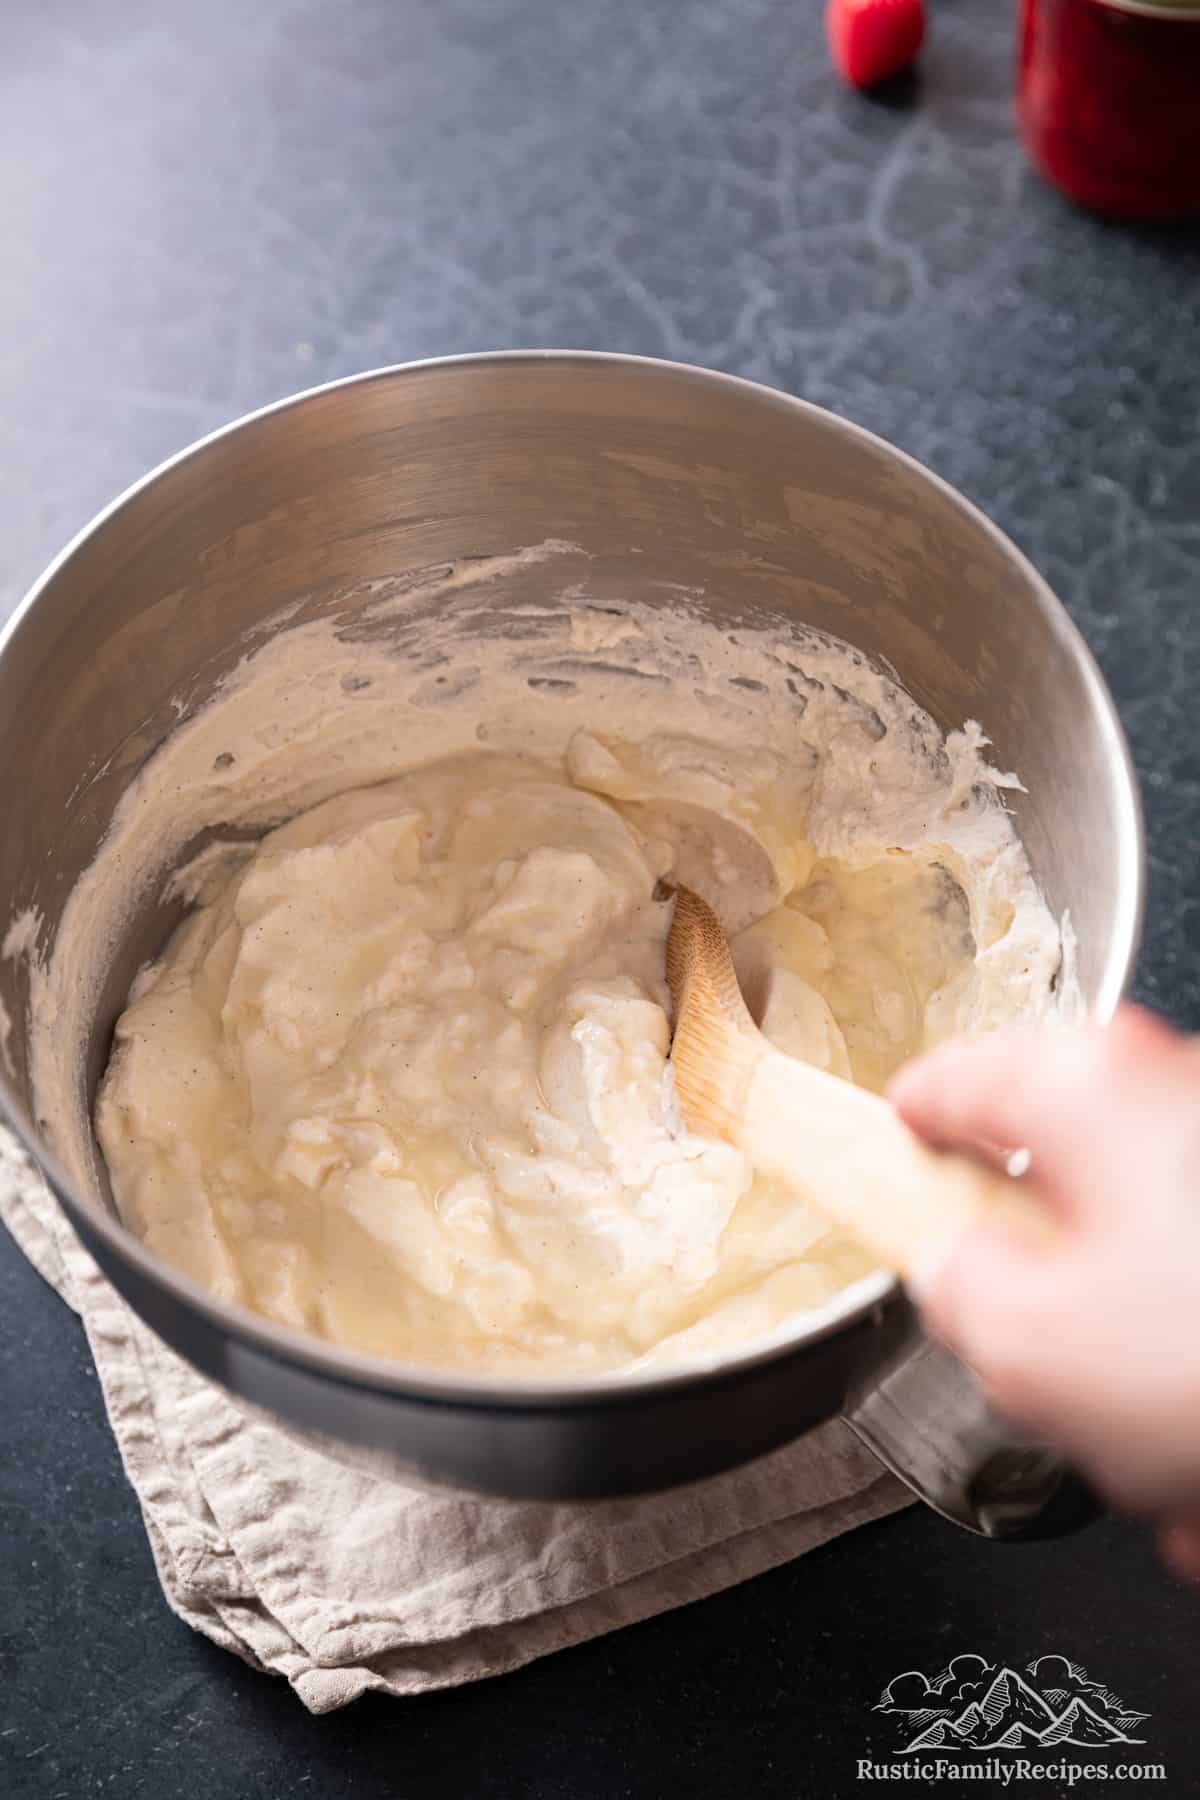 A wooden spatula is used to fold condensed milk into whipped cream in the bowl of a stand mixer.